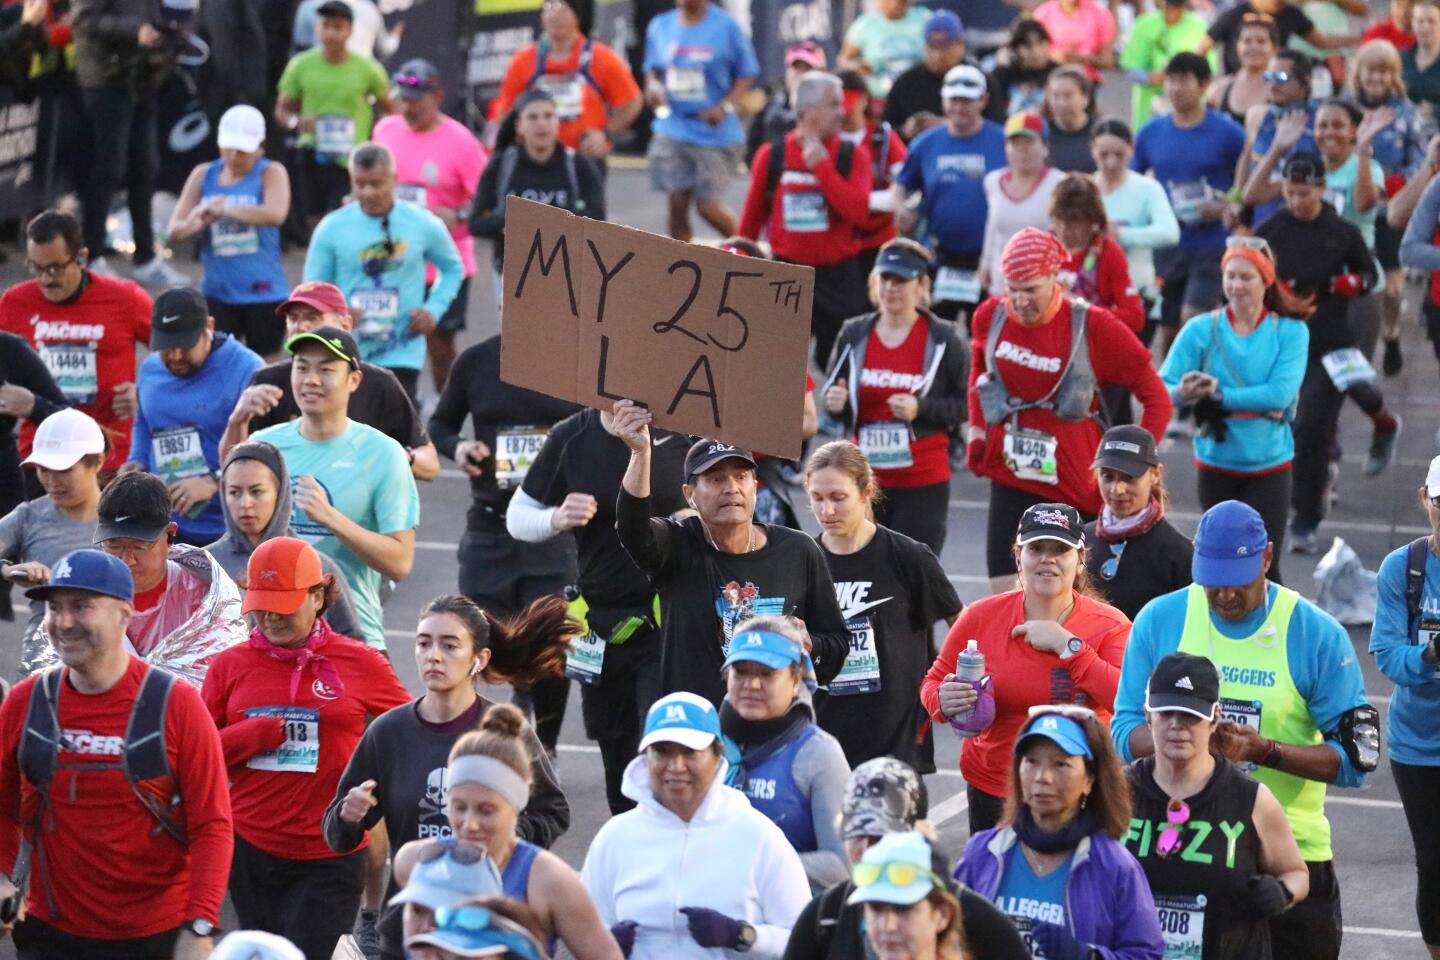 One runner shows his dedication to running the marathon at the start of the 35th L.A. Marathon at Dodger Stadium.